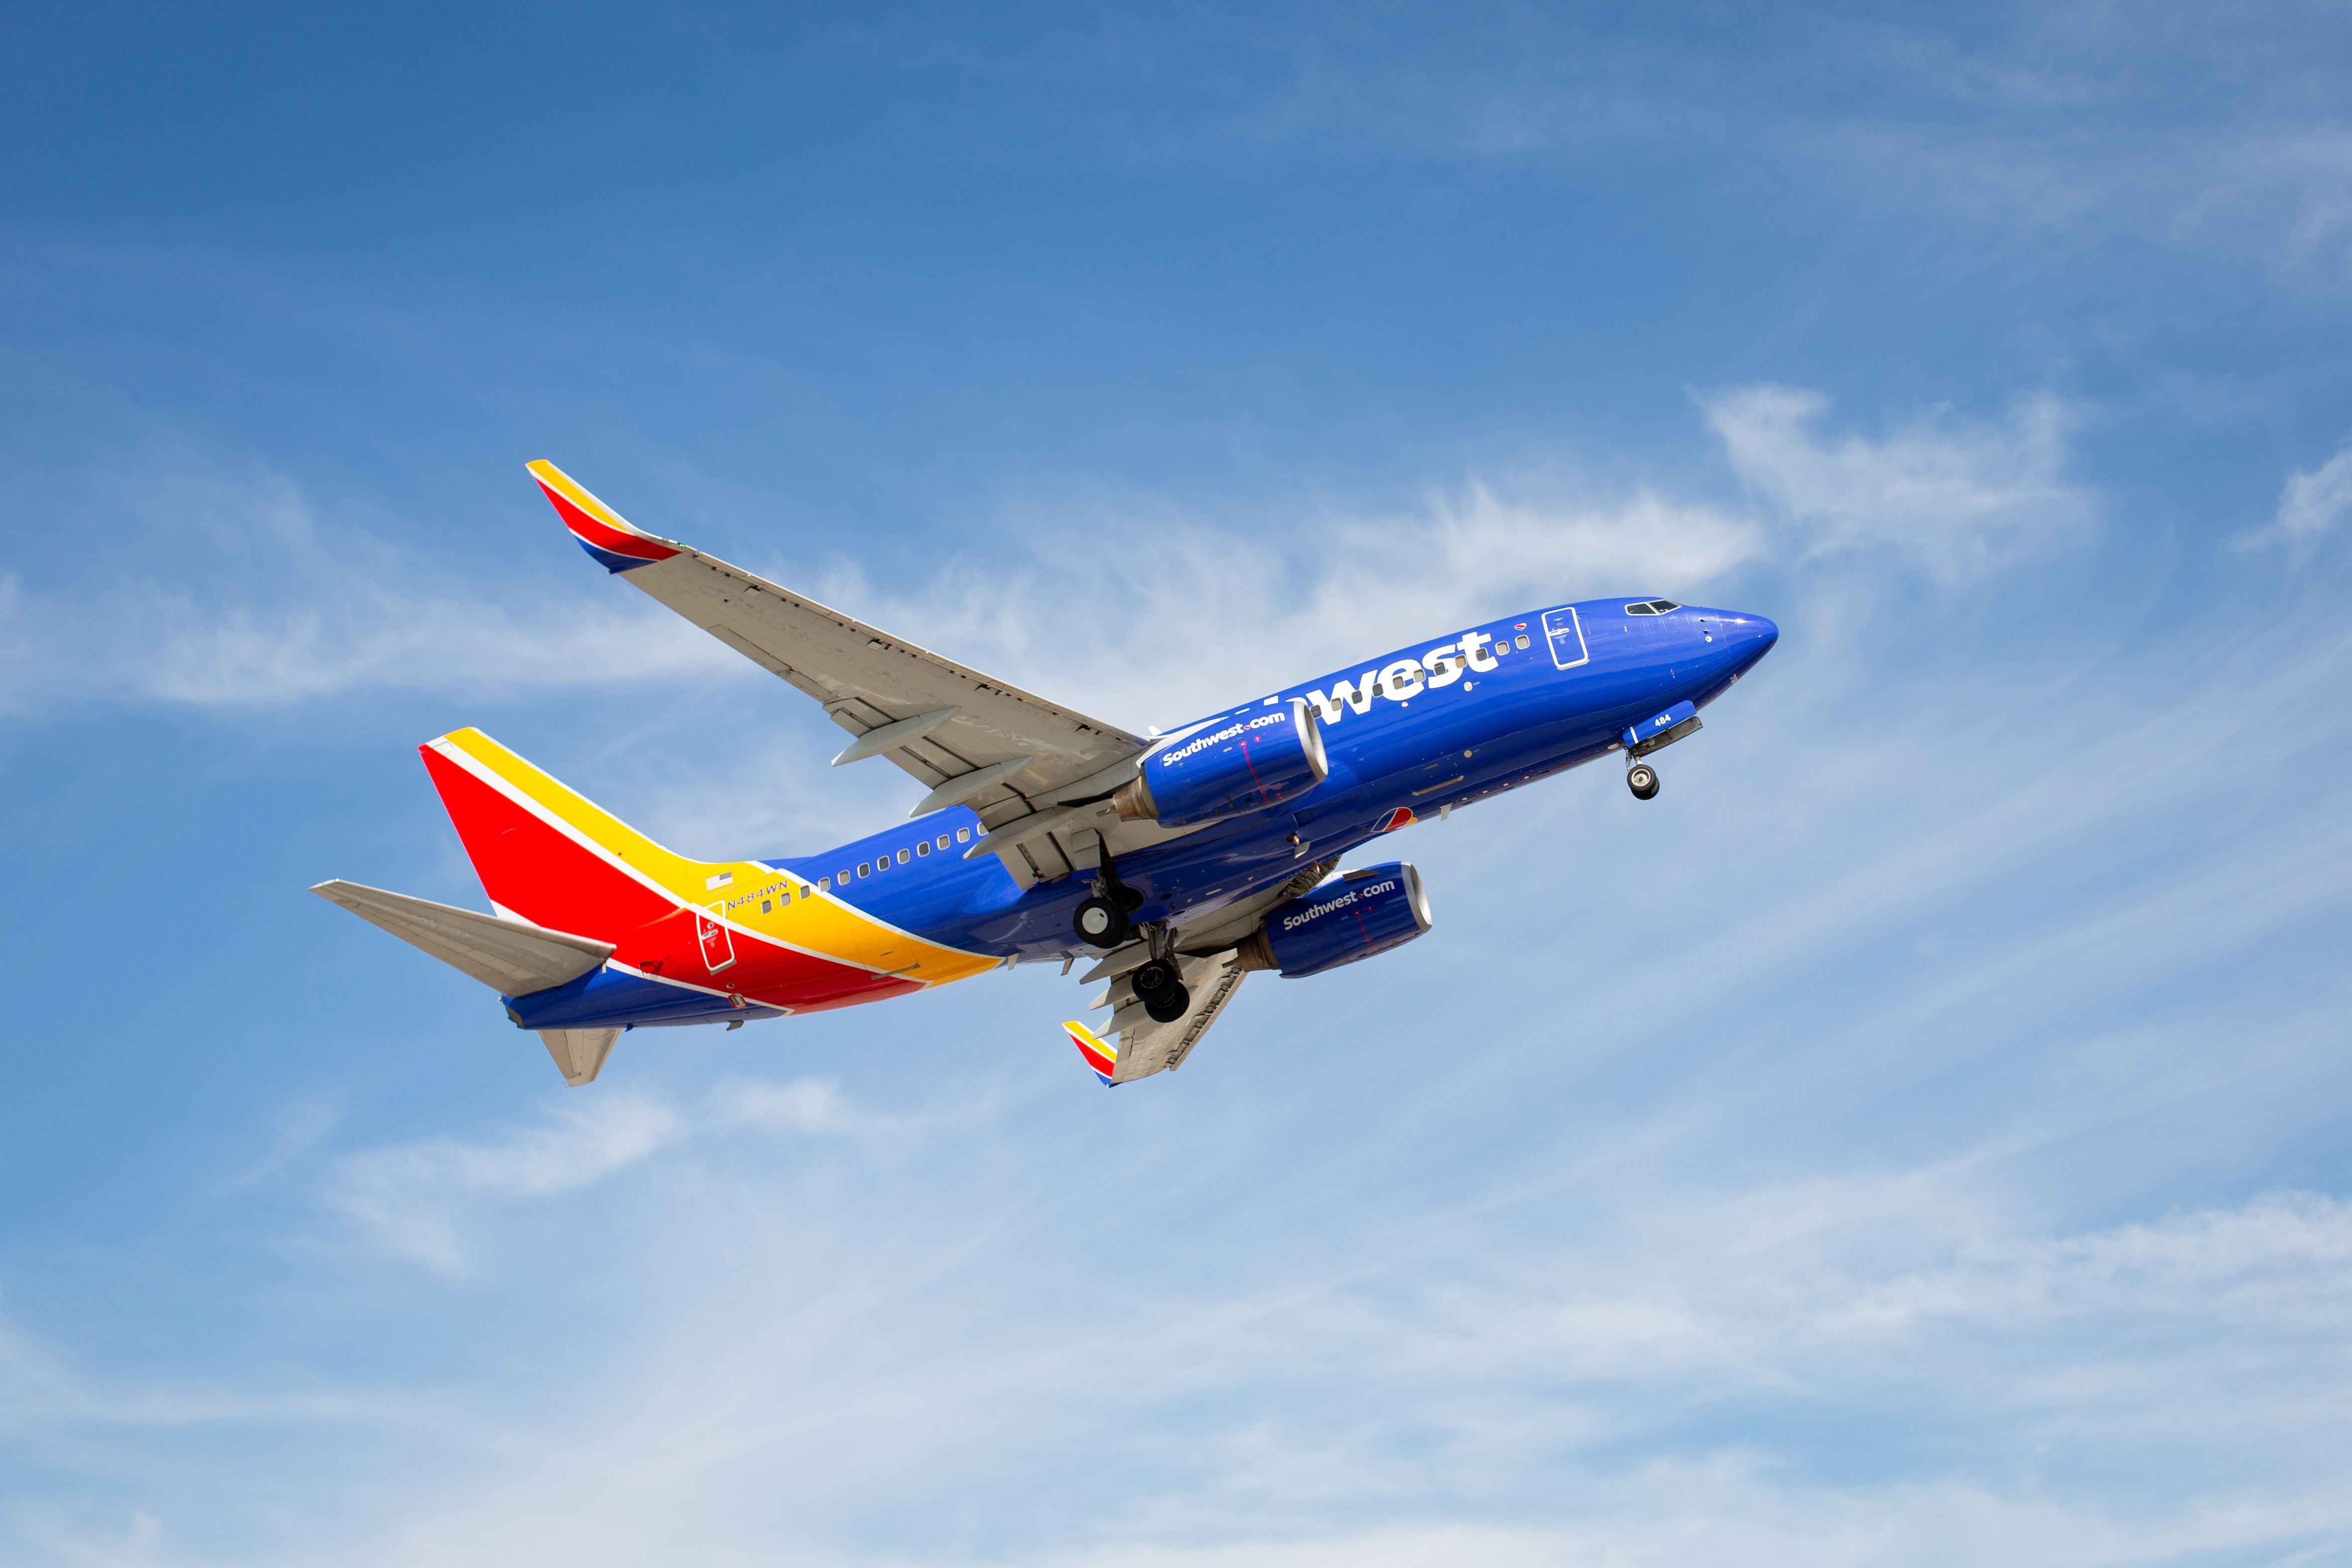 201008PHX_International-PRINT023-source-source - N484WN - Southwest Airlines Boeing 737-700